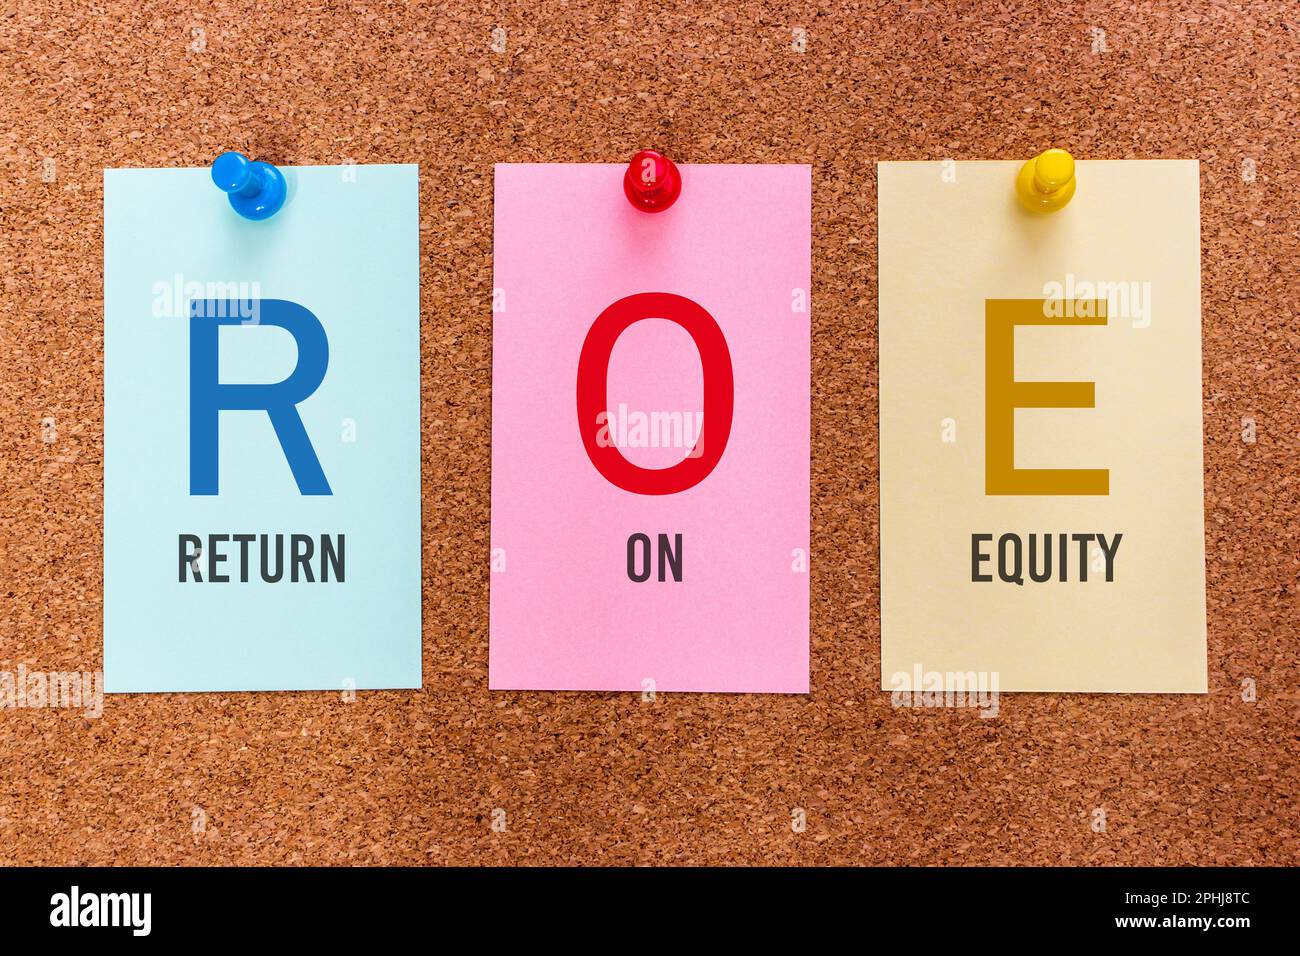 Conceptual 3 letters keyword ROE (Return on Equity), on multicolored stickers attached to a cork board. Stock Photo